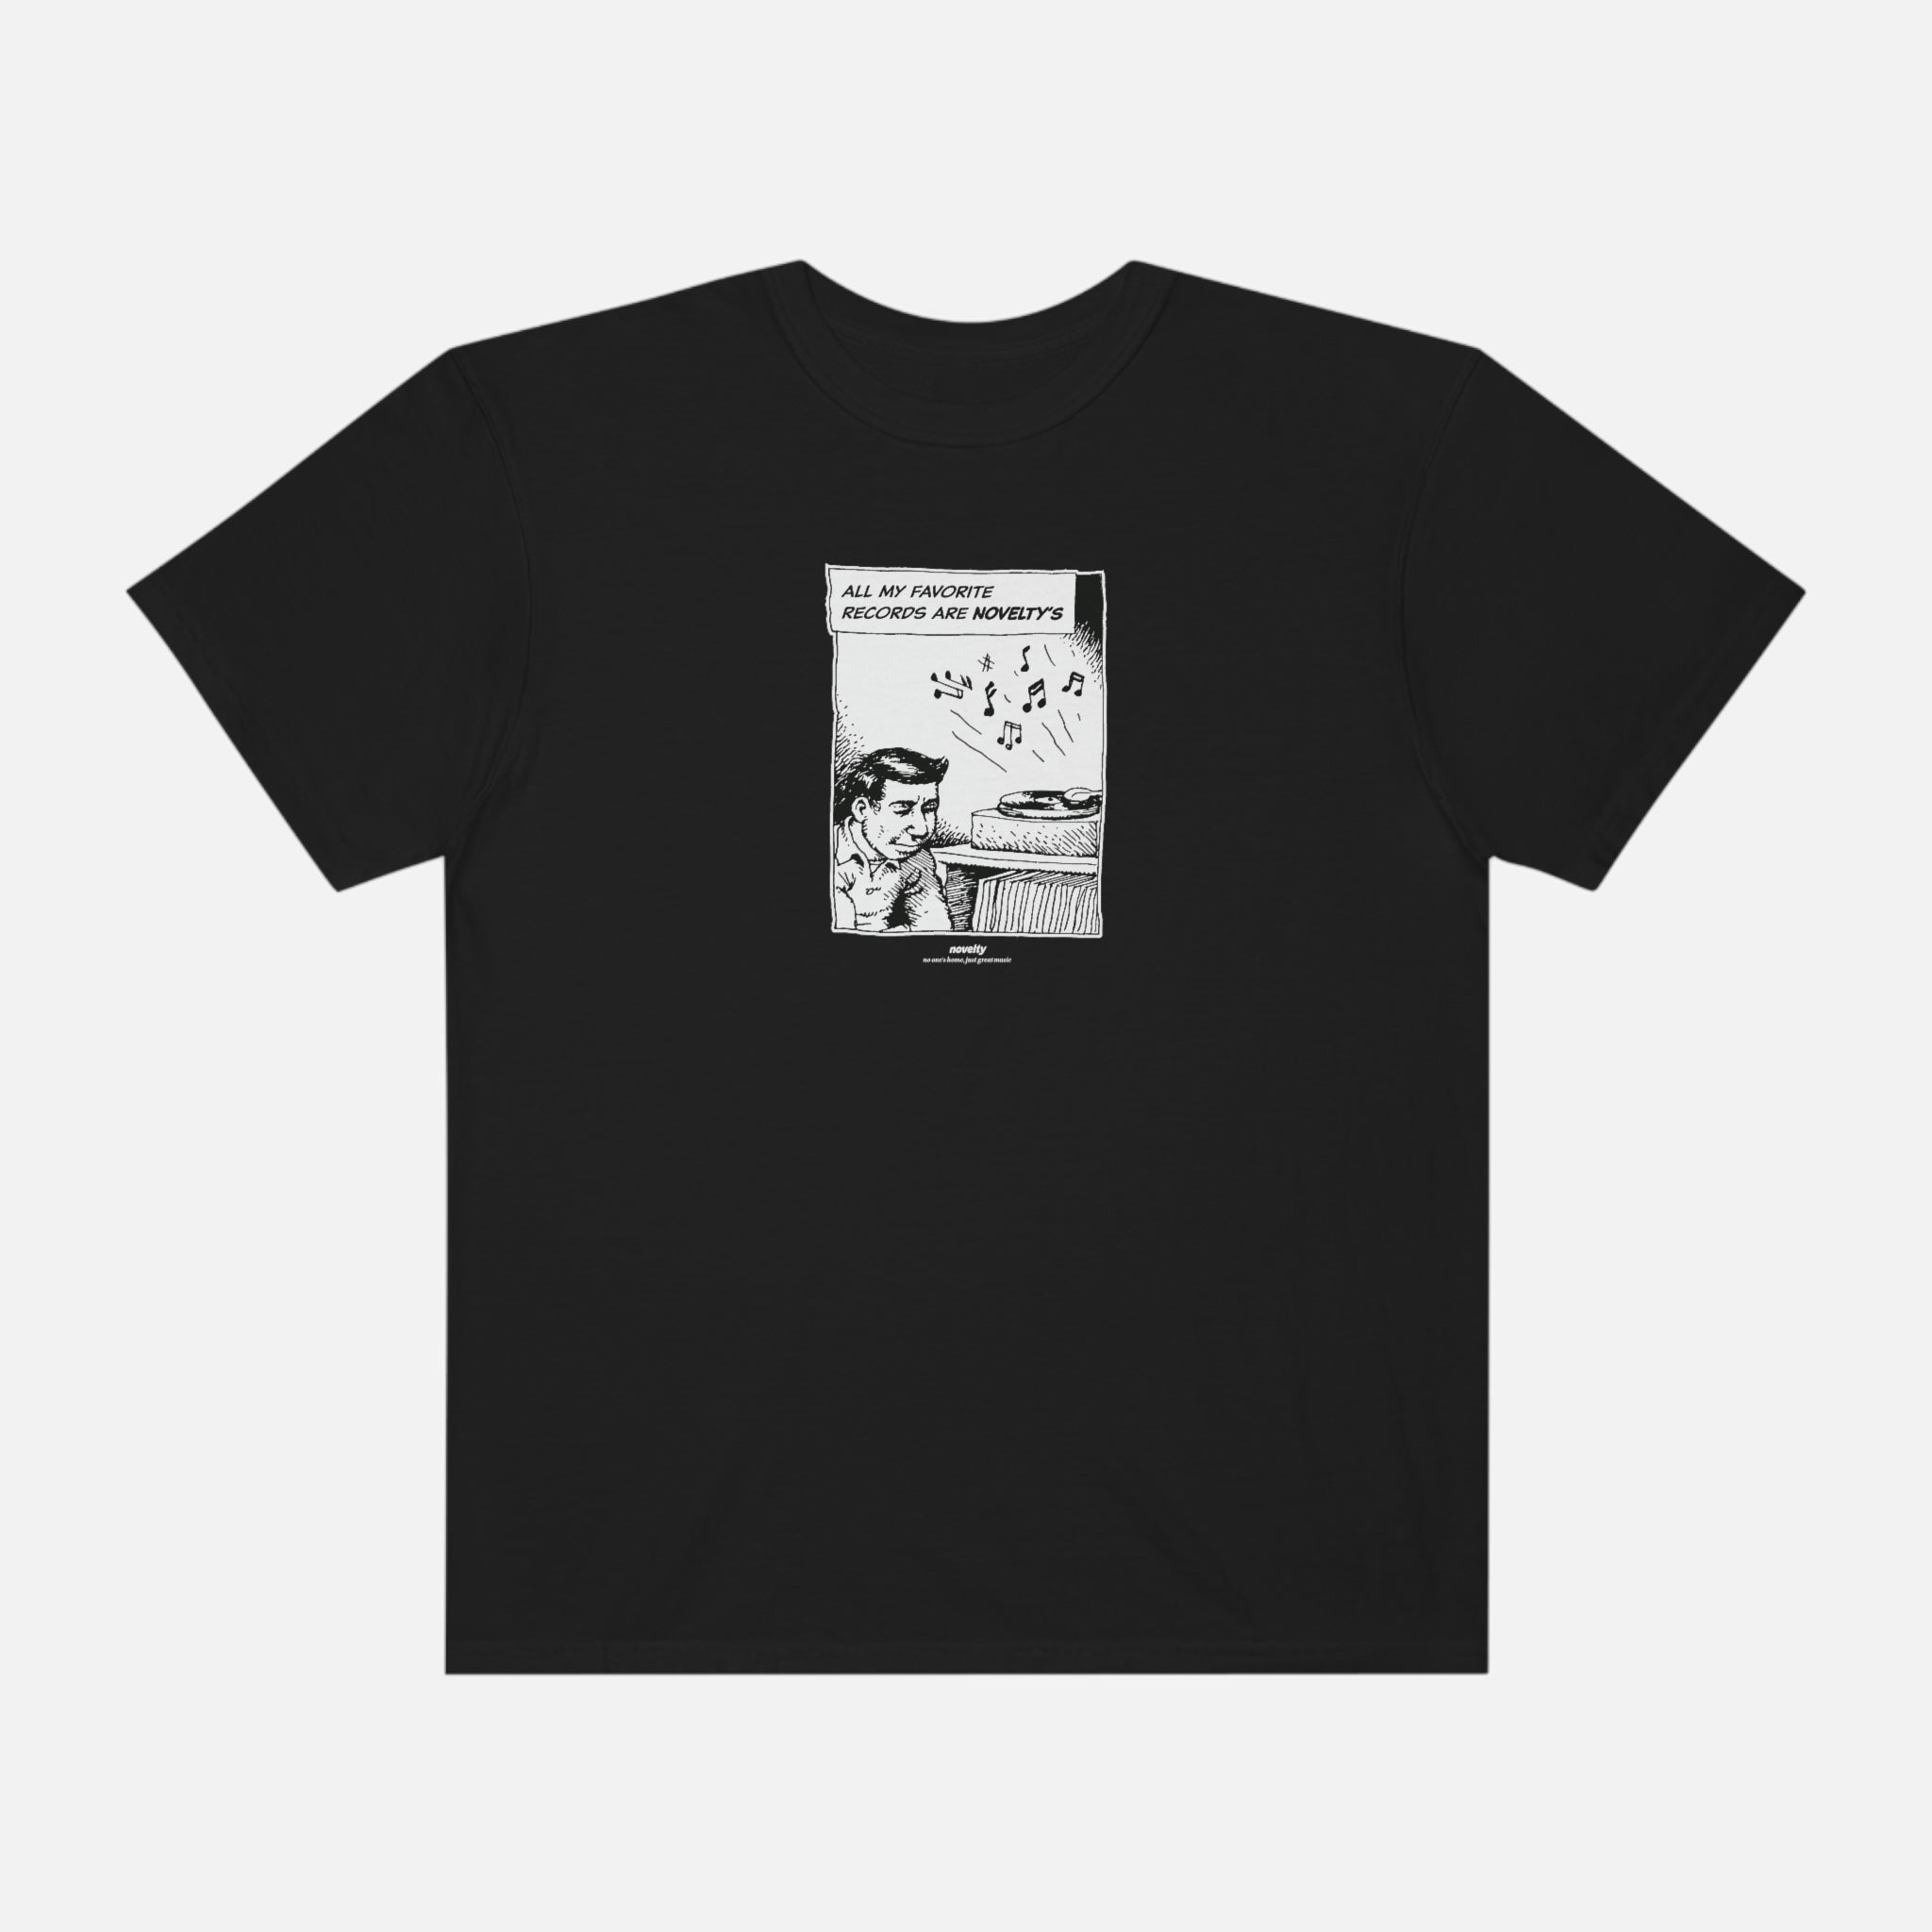 "All My Favorite Records" Comic Tee